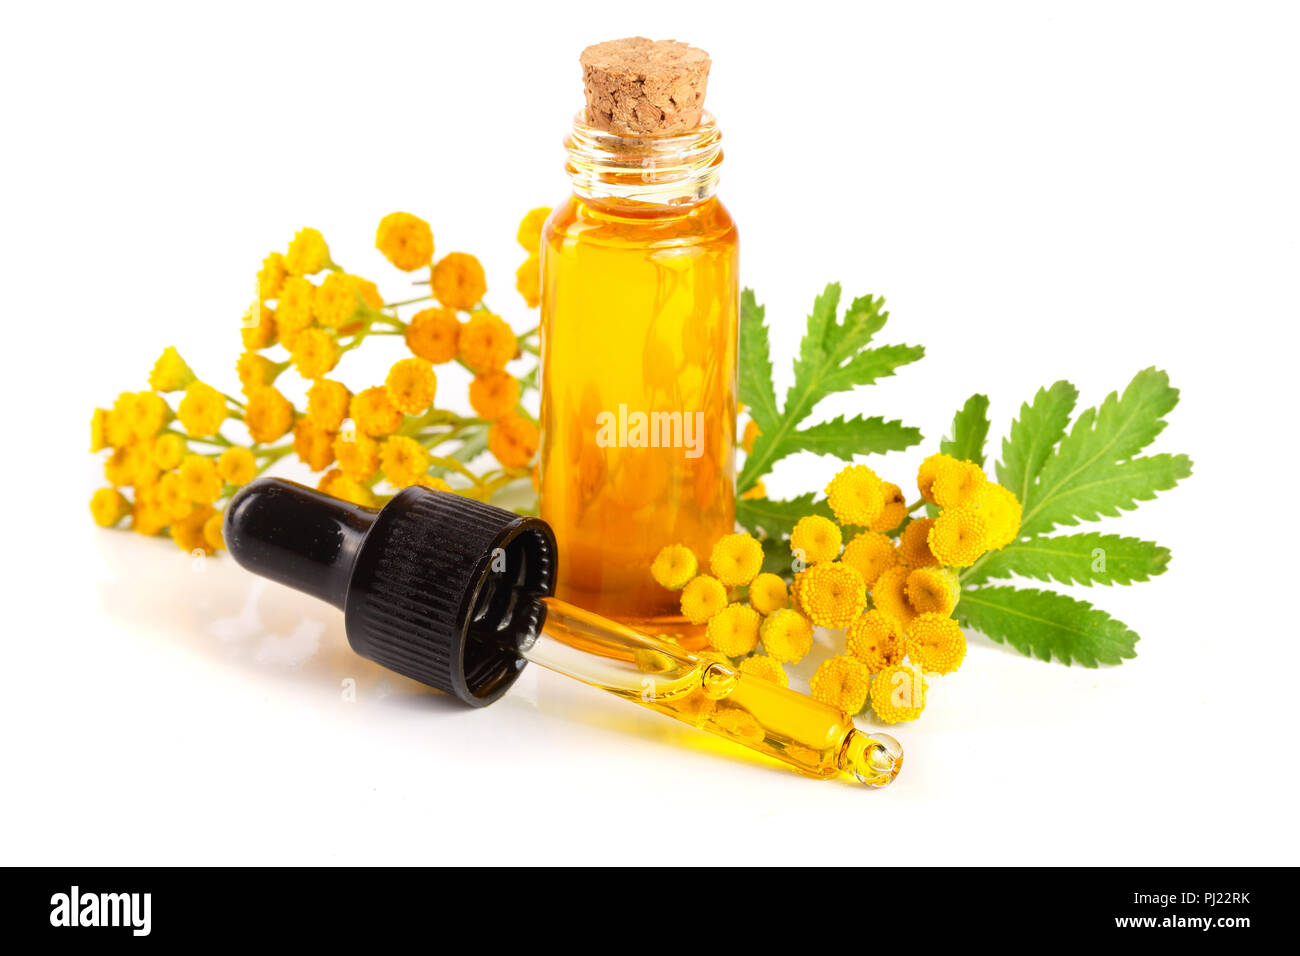 essential tansy oil with flowers and leaf isolated on white background. Stock Photo